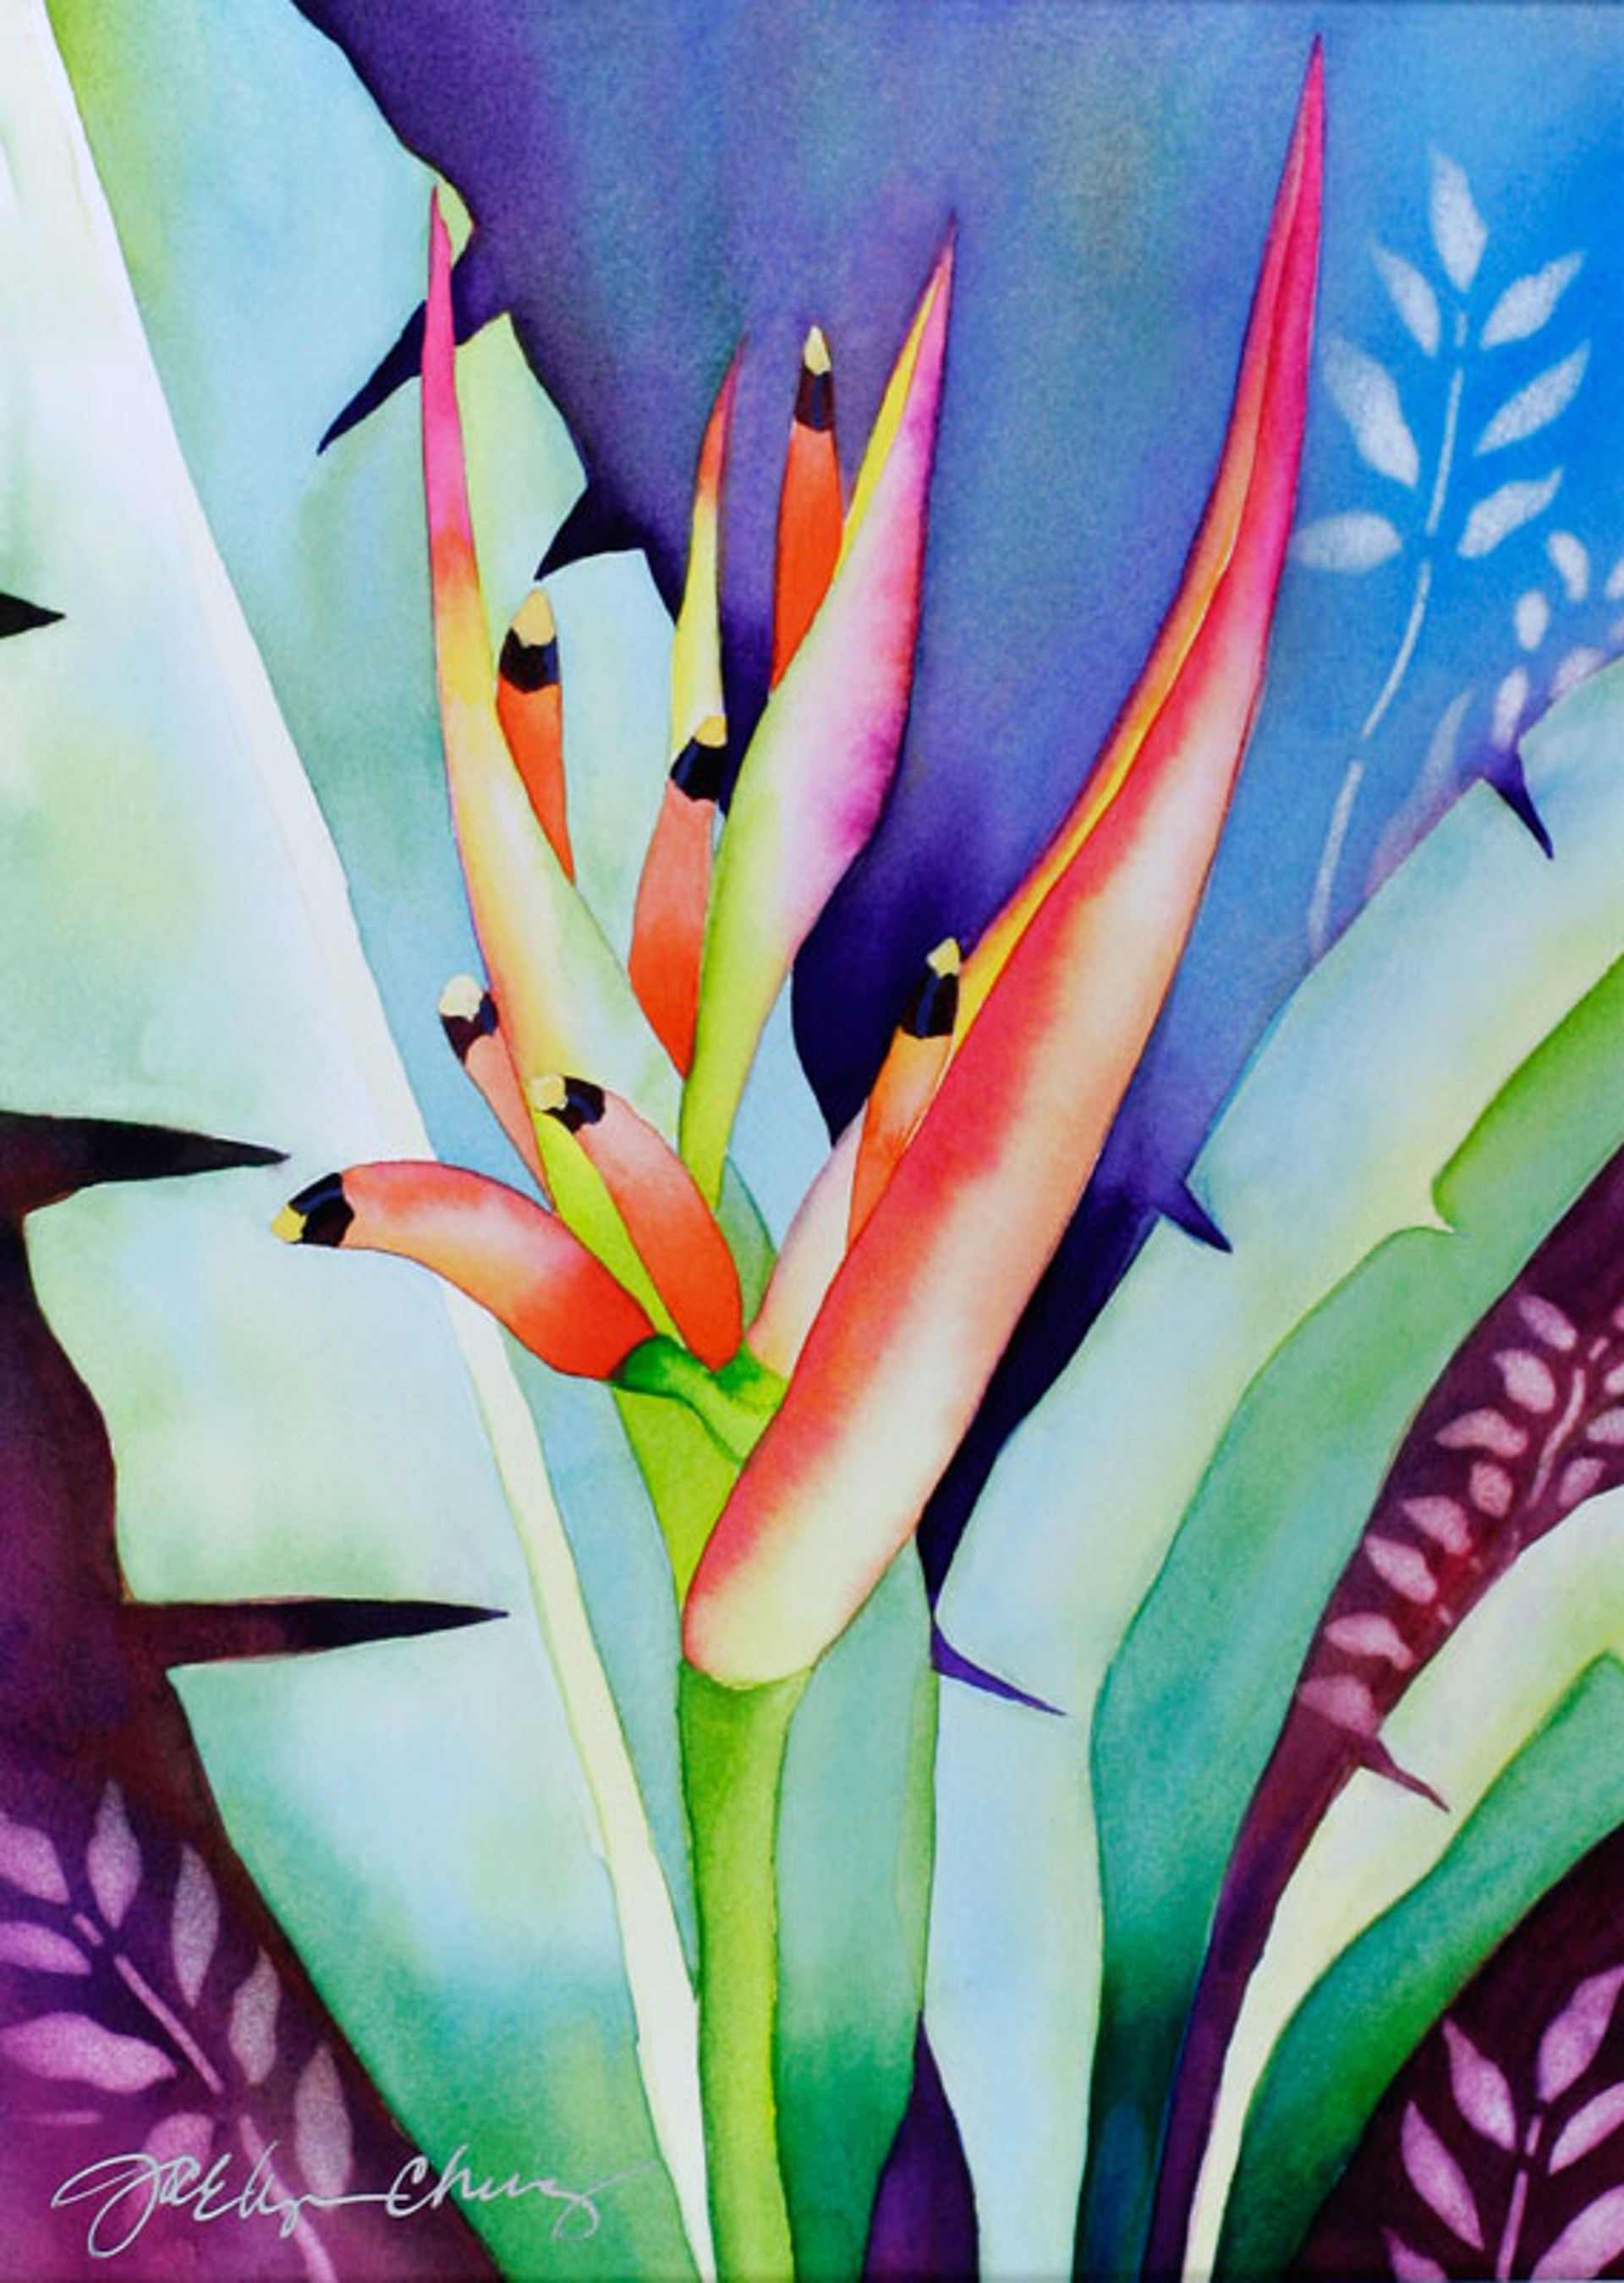 Sassy Heliconia by Jocelyn Cheng